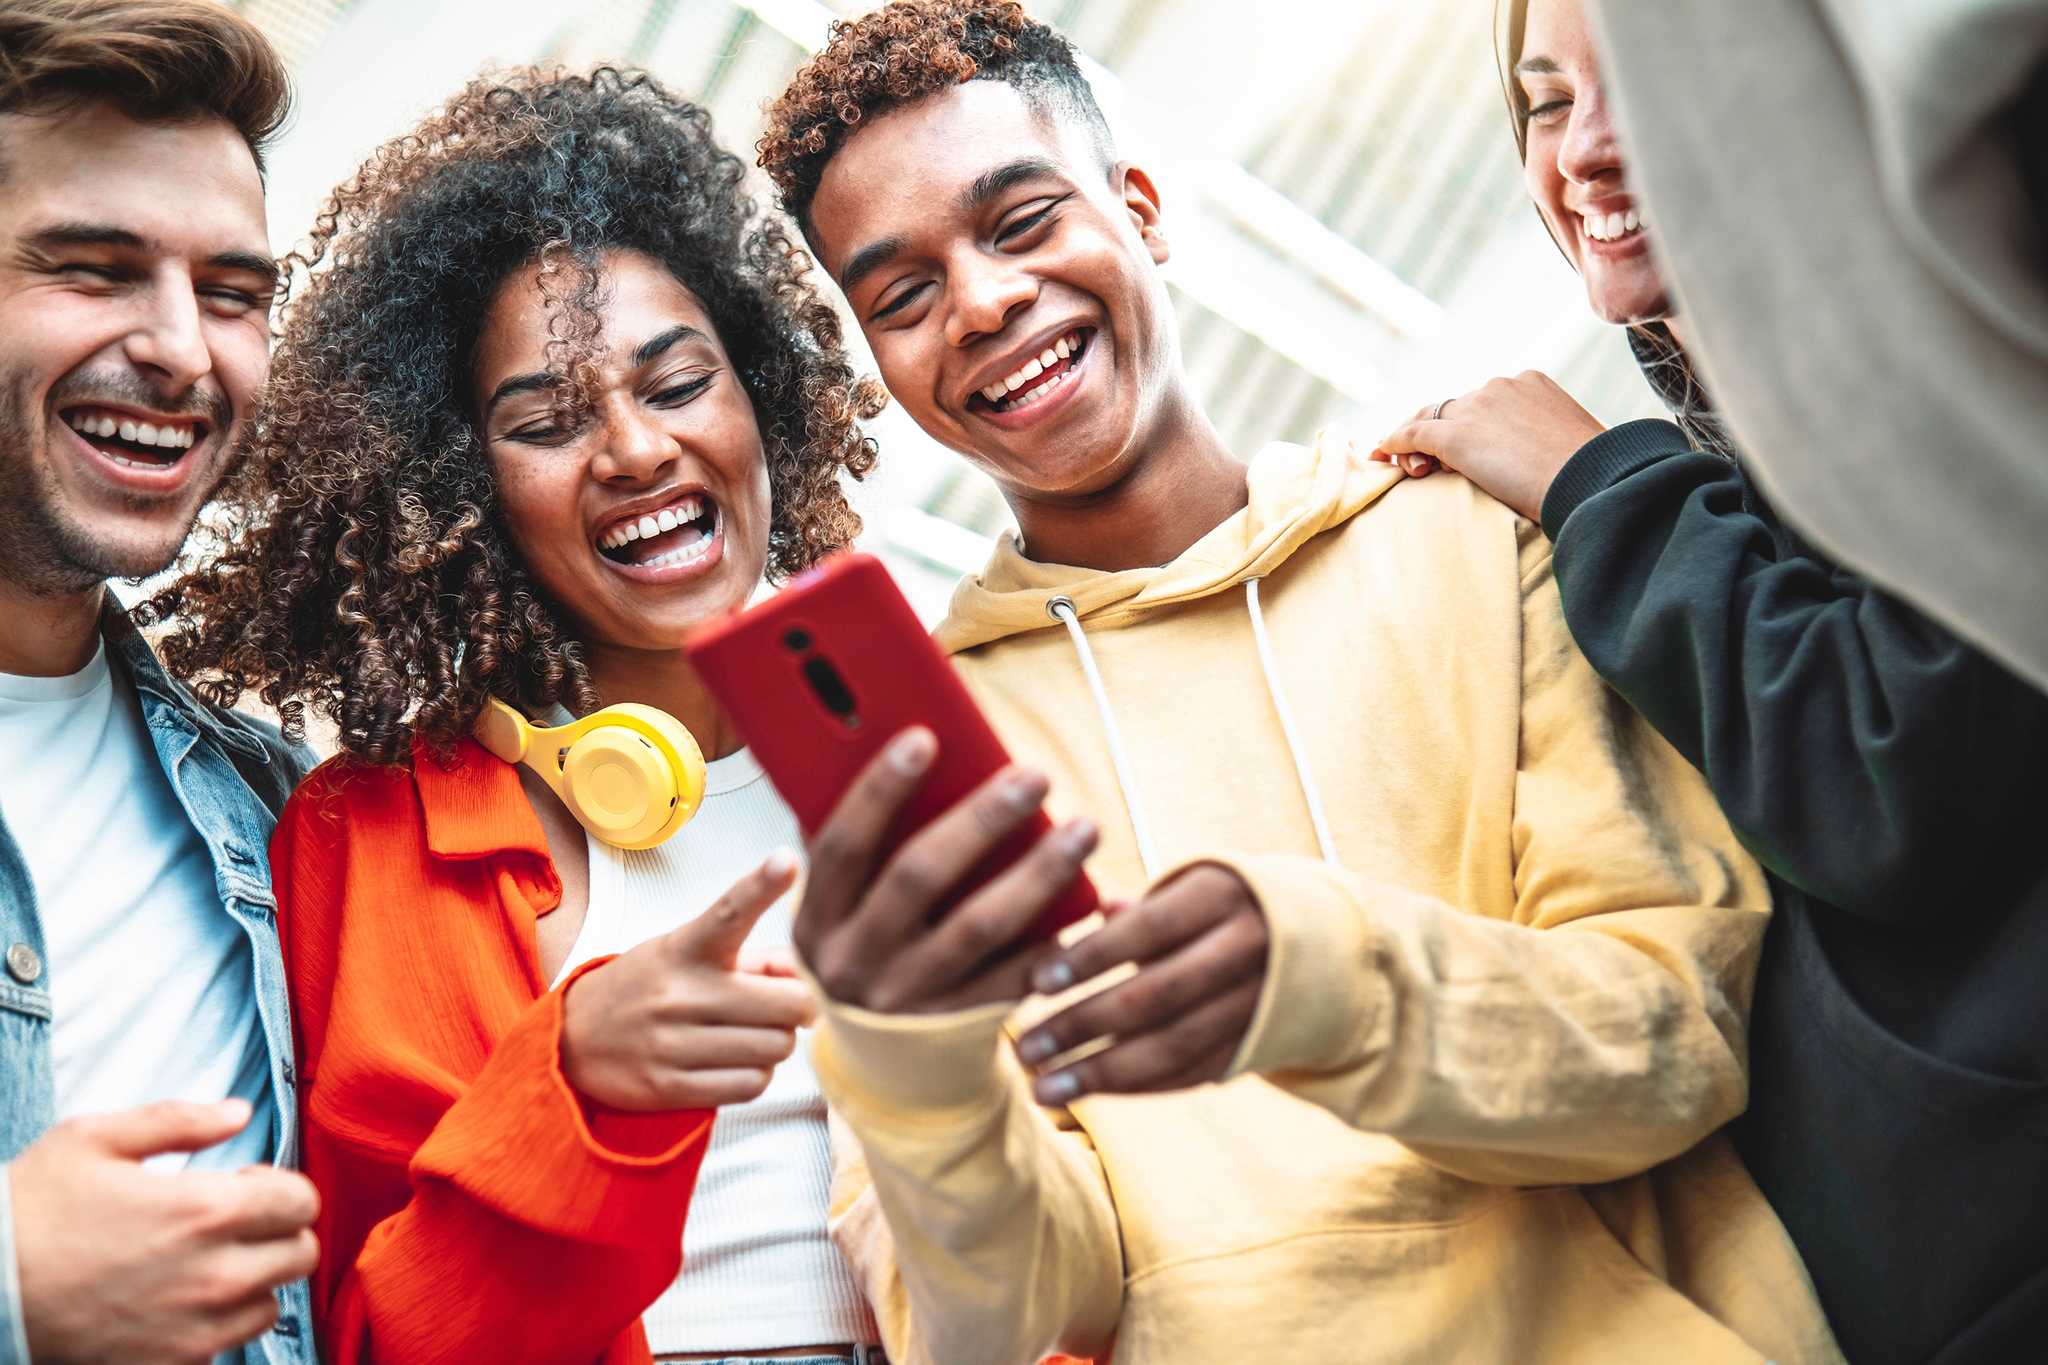 Young people crowded around a mobile phone.